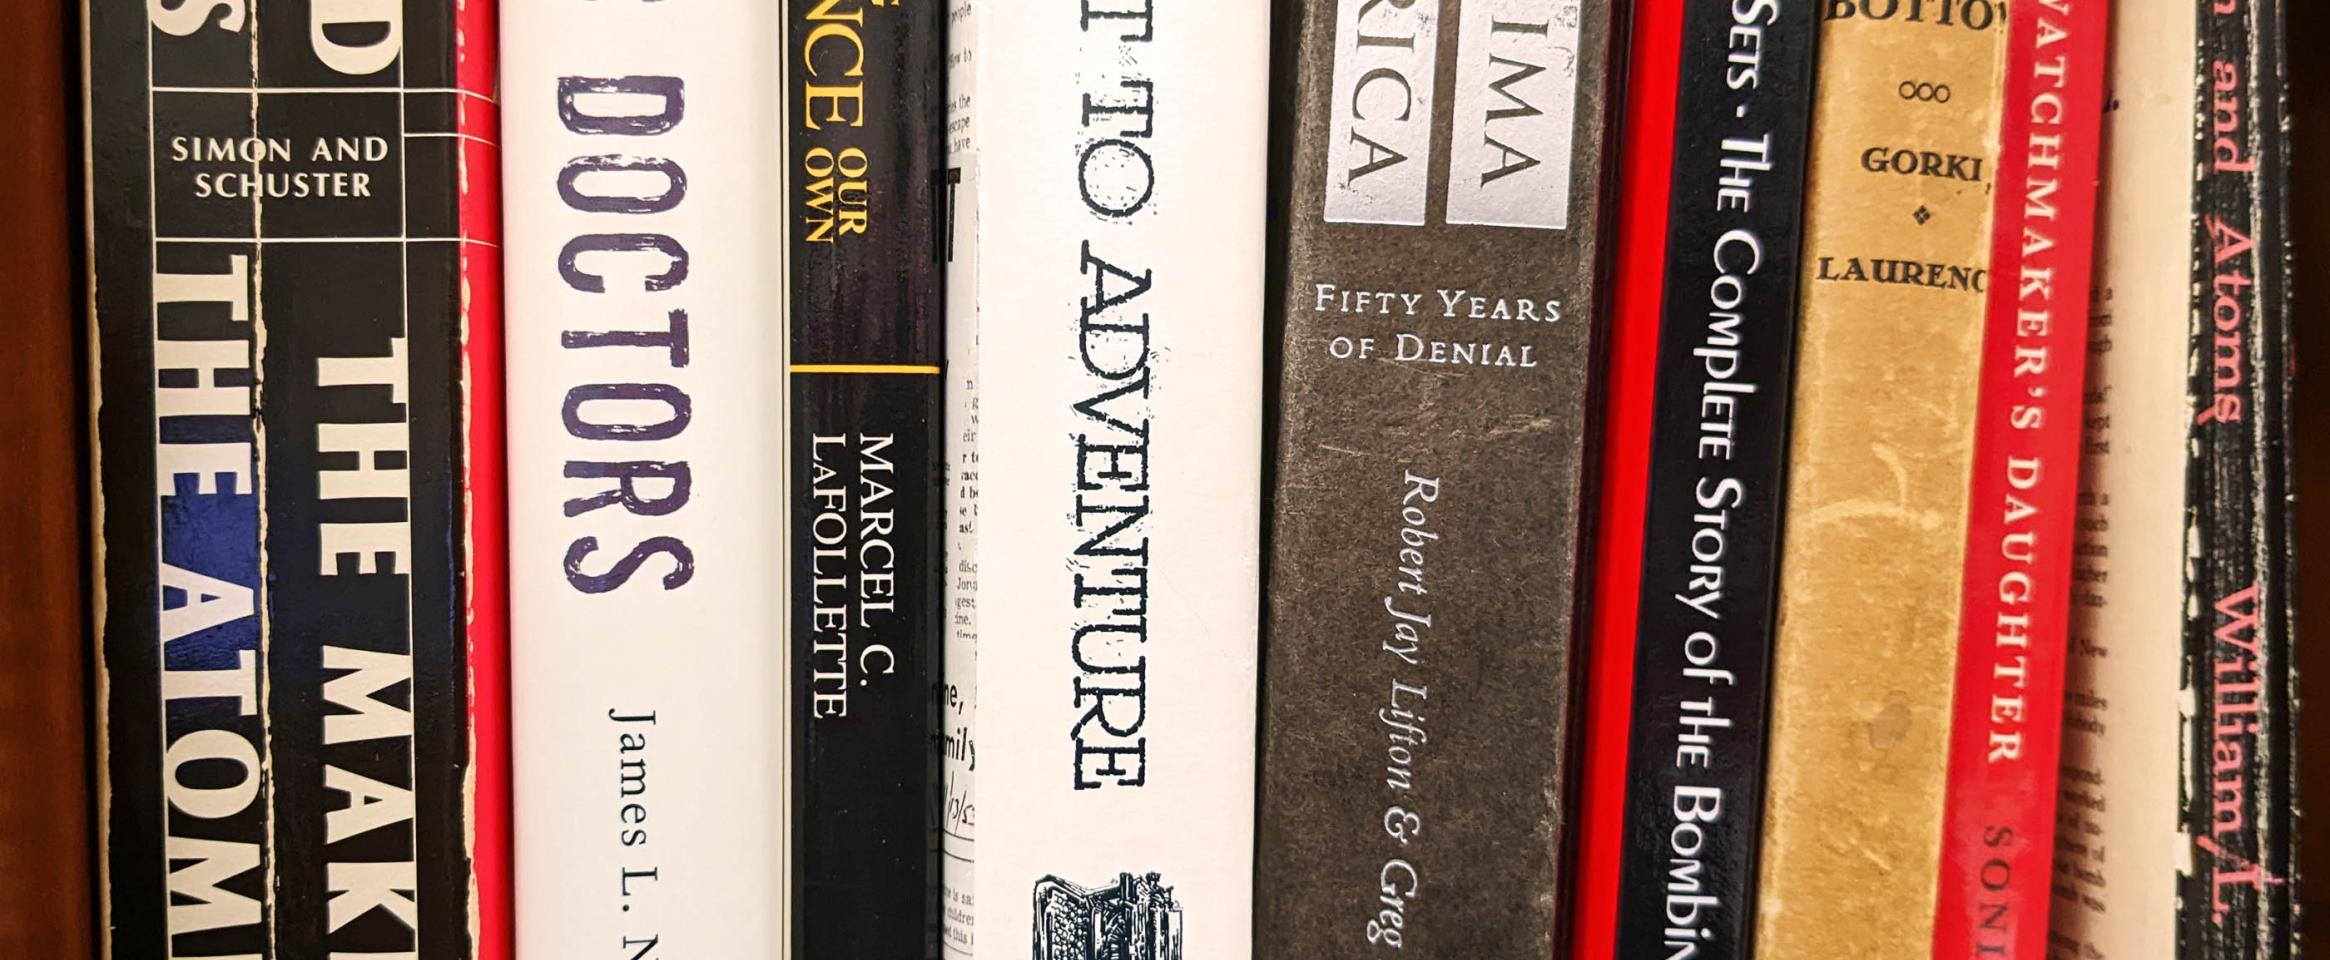 Rectangular photo of a close up view of books on a bookshelf, with spines facing out and many titles related to atomic science and history.